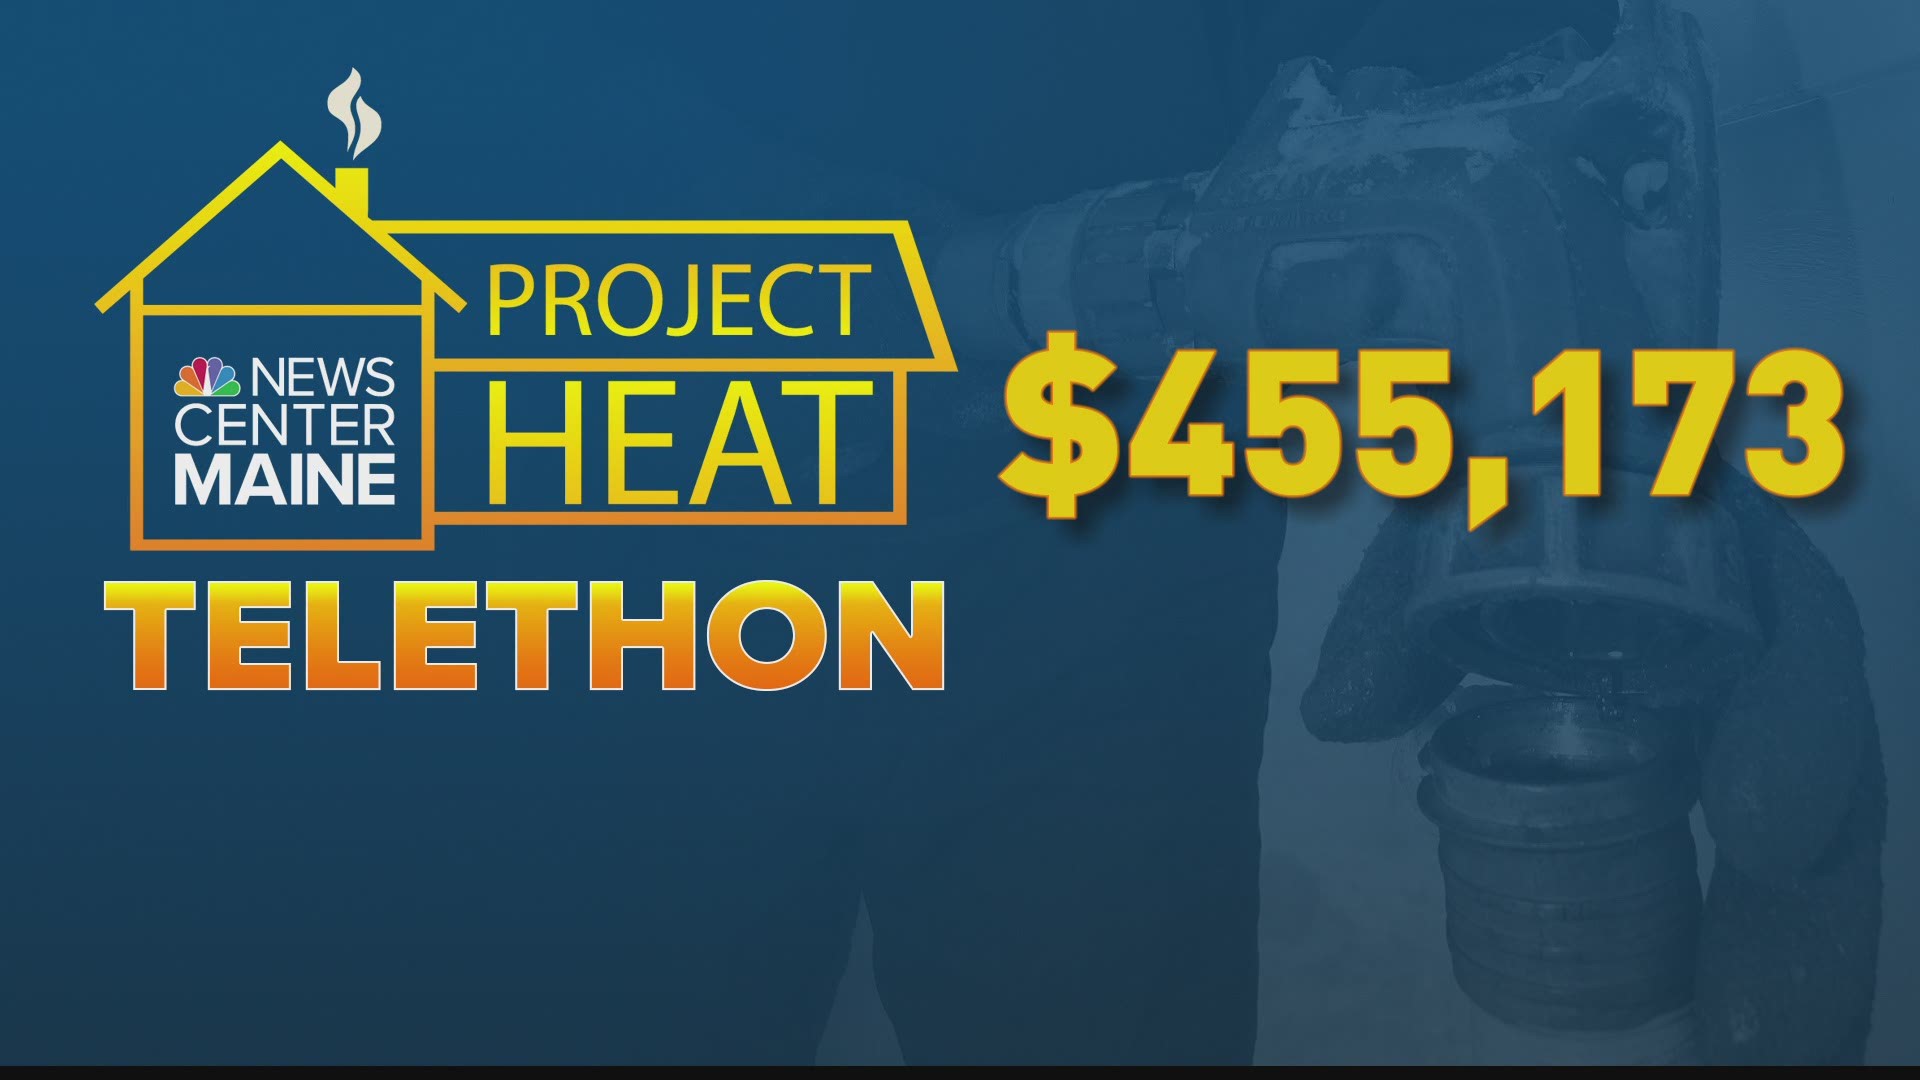 Thank you for donating to Project Heat 2021!